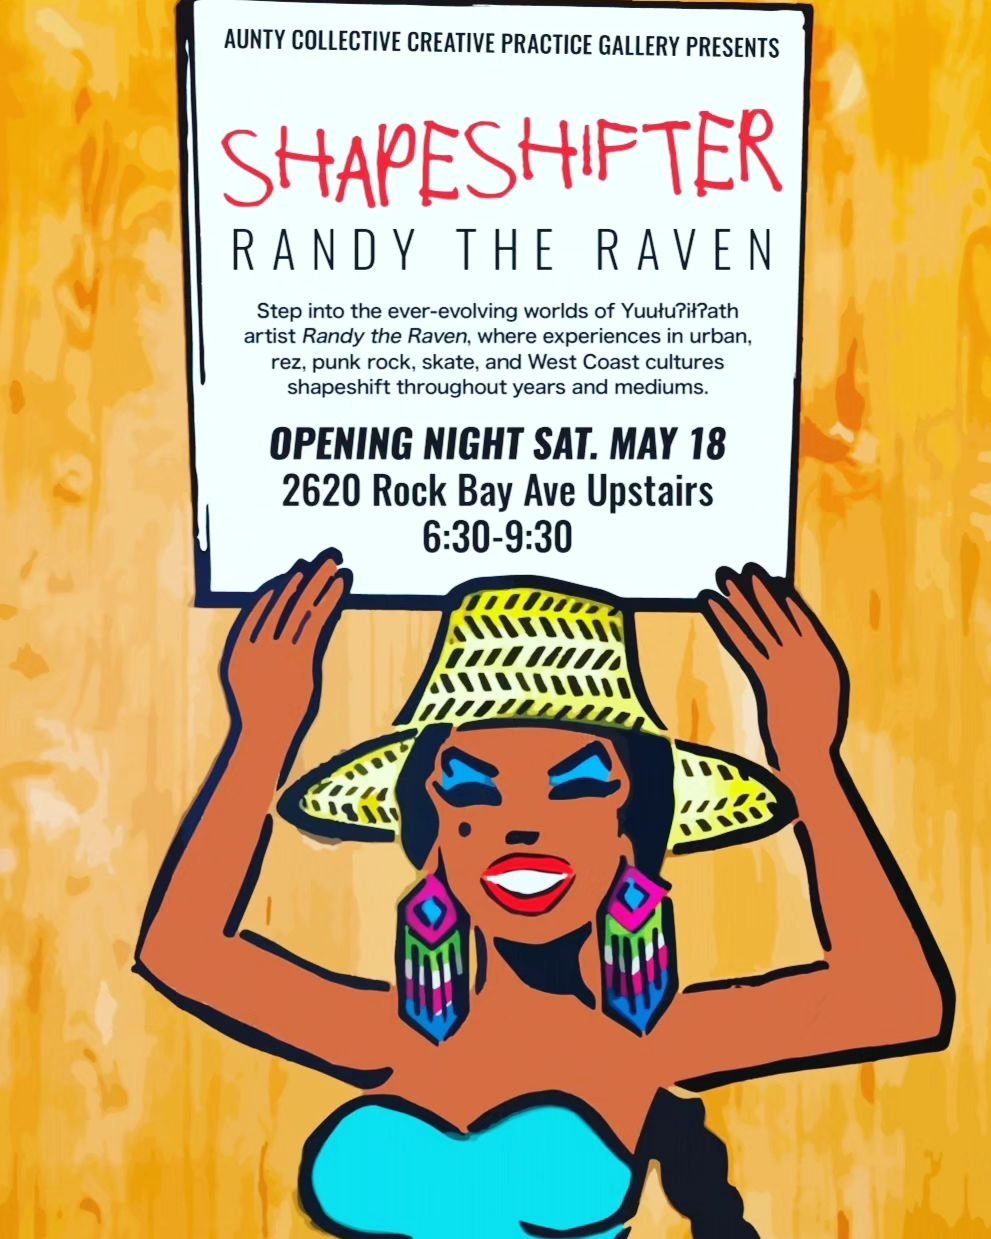 Aunty Collective Creative Practice Gallery Presents:&nbsp;

Shapeshifter

Randy the Raven @randy_the_raven

Yuułuʔiłʔatḥ artist Randy the Raven&rsquo;s creations in Shapeshifter celebrate the vibrancy/diversity of expression in contemporary Indigenou